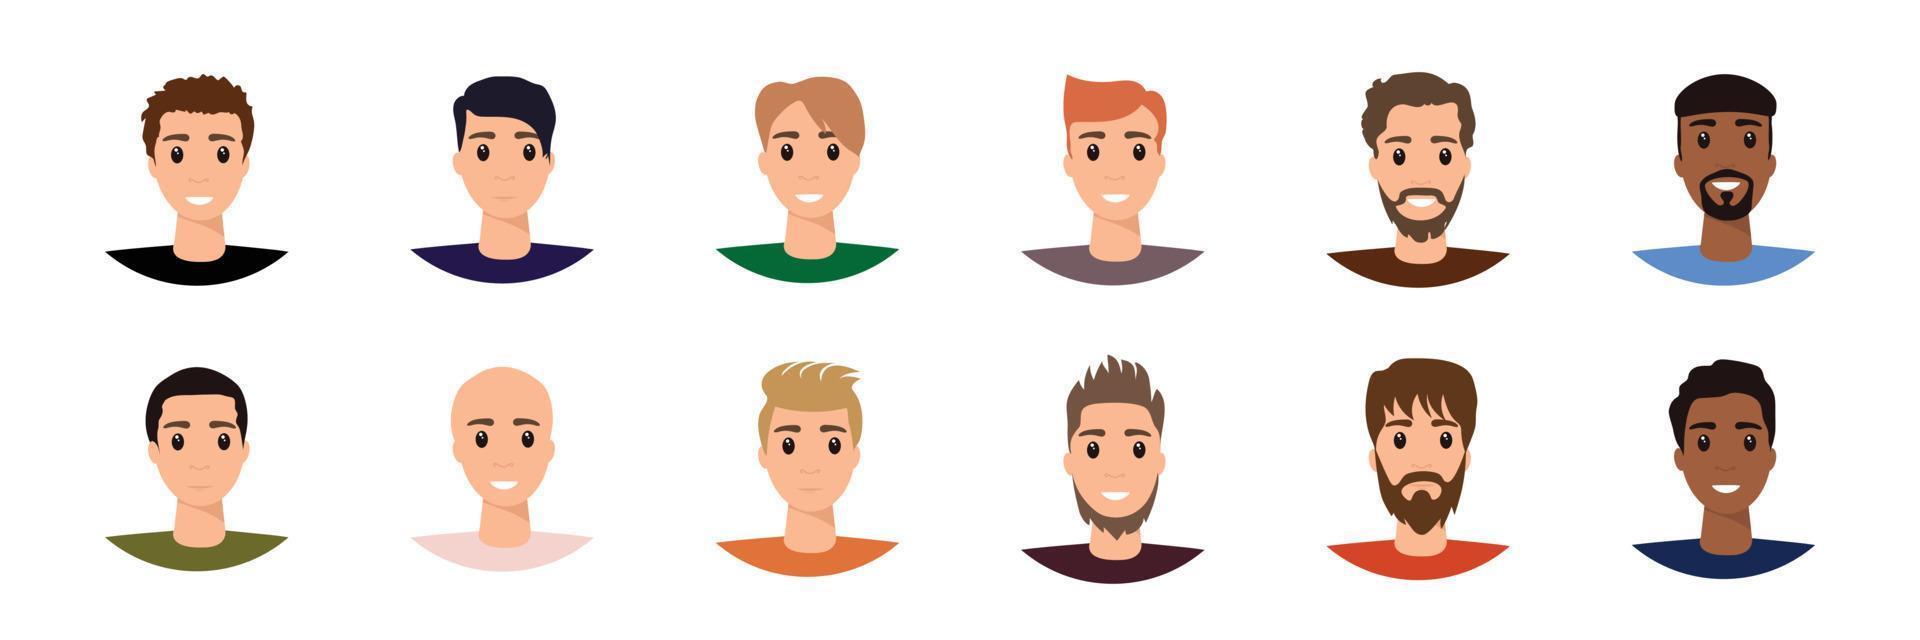 Male character face construction. Man avatar creation kit. Generator, constructor of diverse hairstyles, skin, eyes, lips, brows set. Colored flat vector illustration isolated on white background